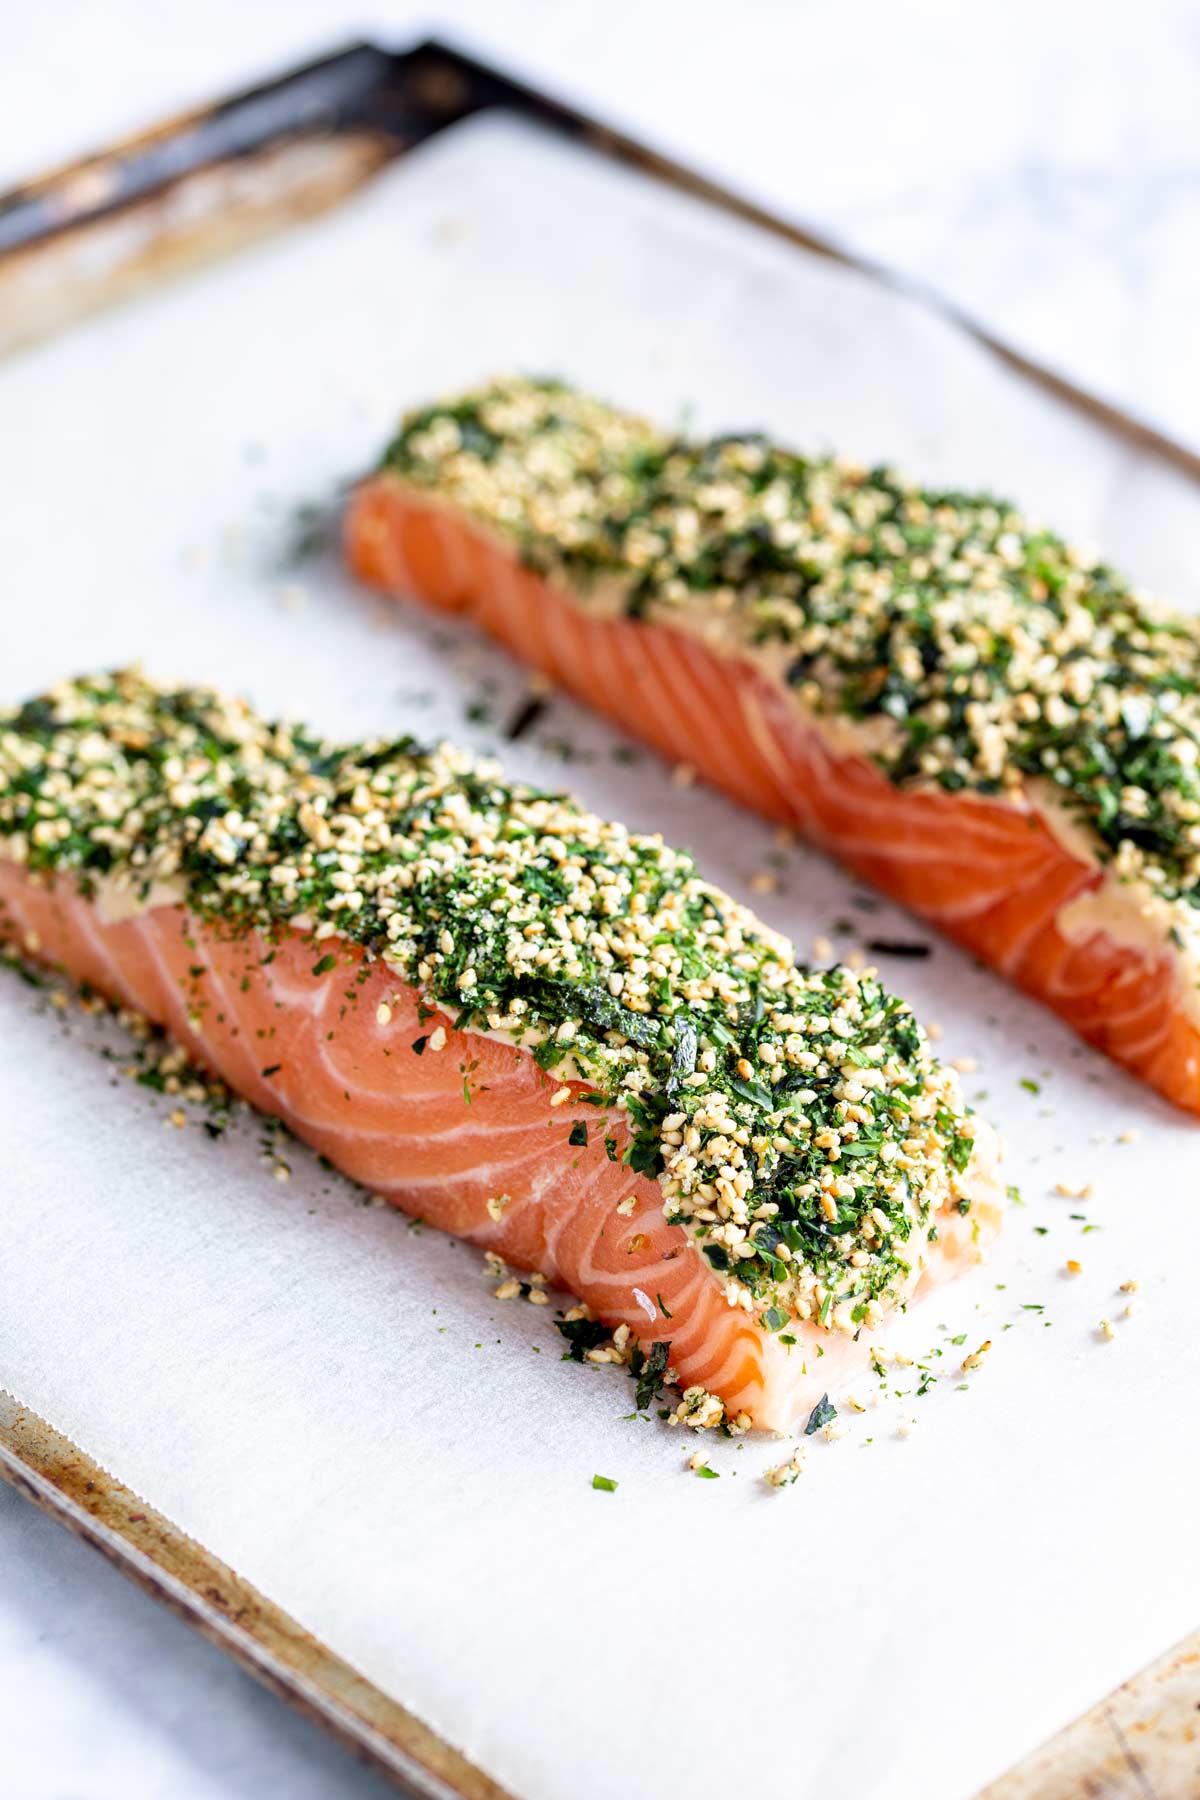 two raw salmon fillets on a baking tray coated in Japanese rice seasoning